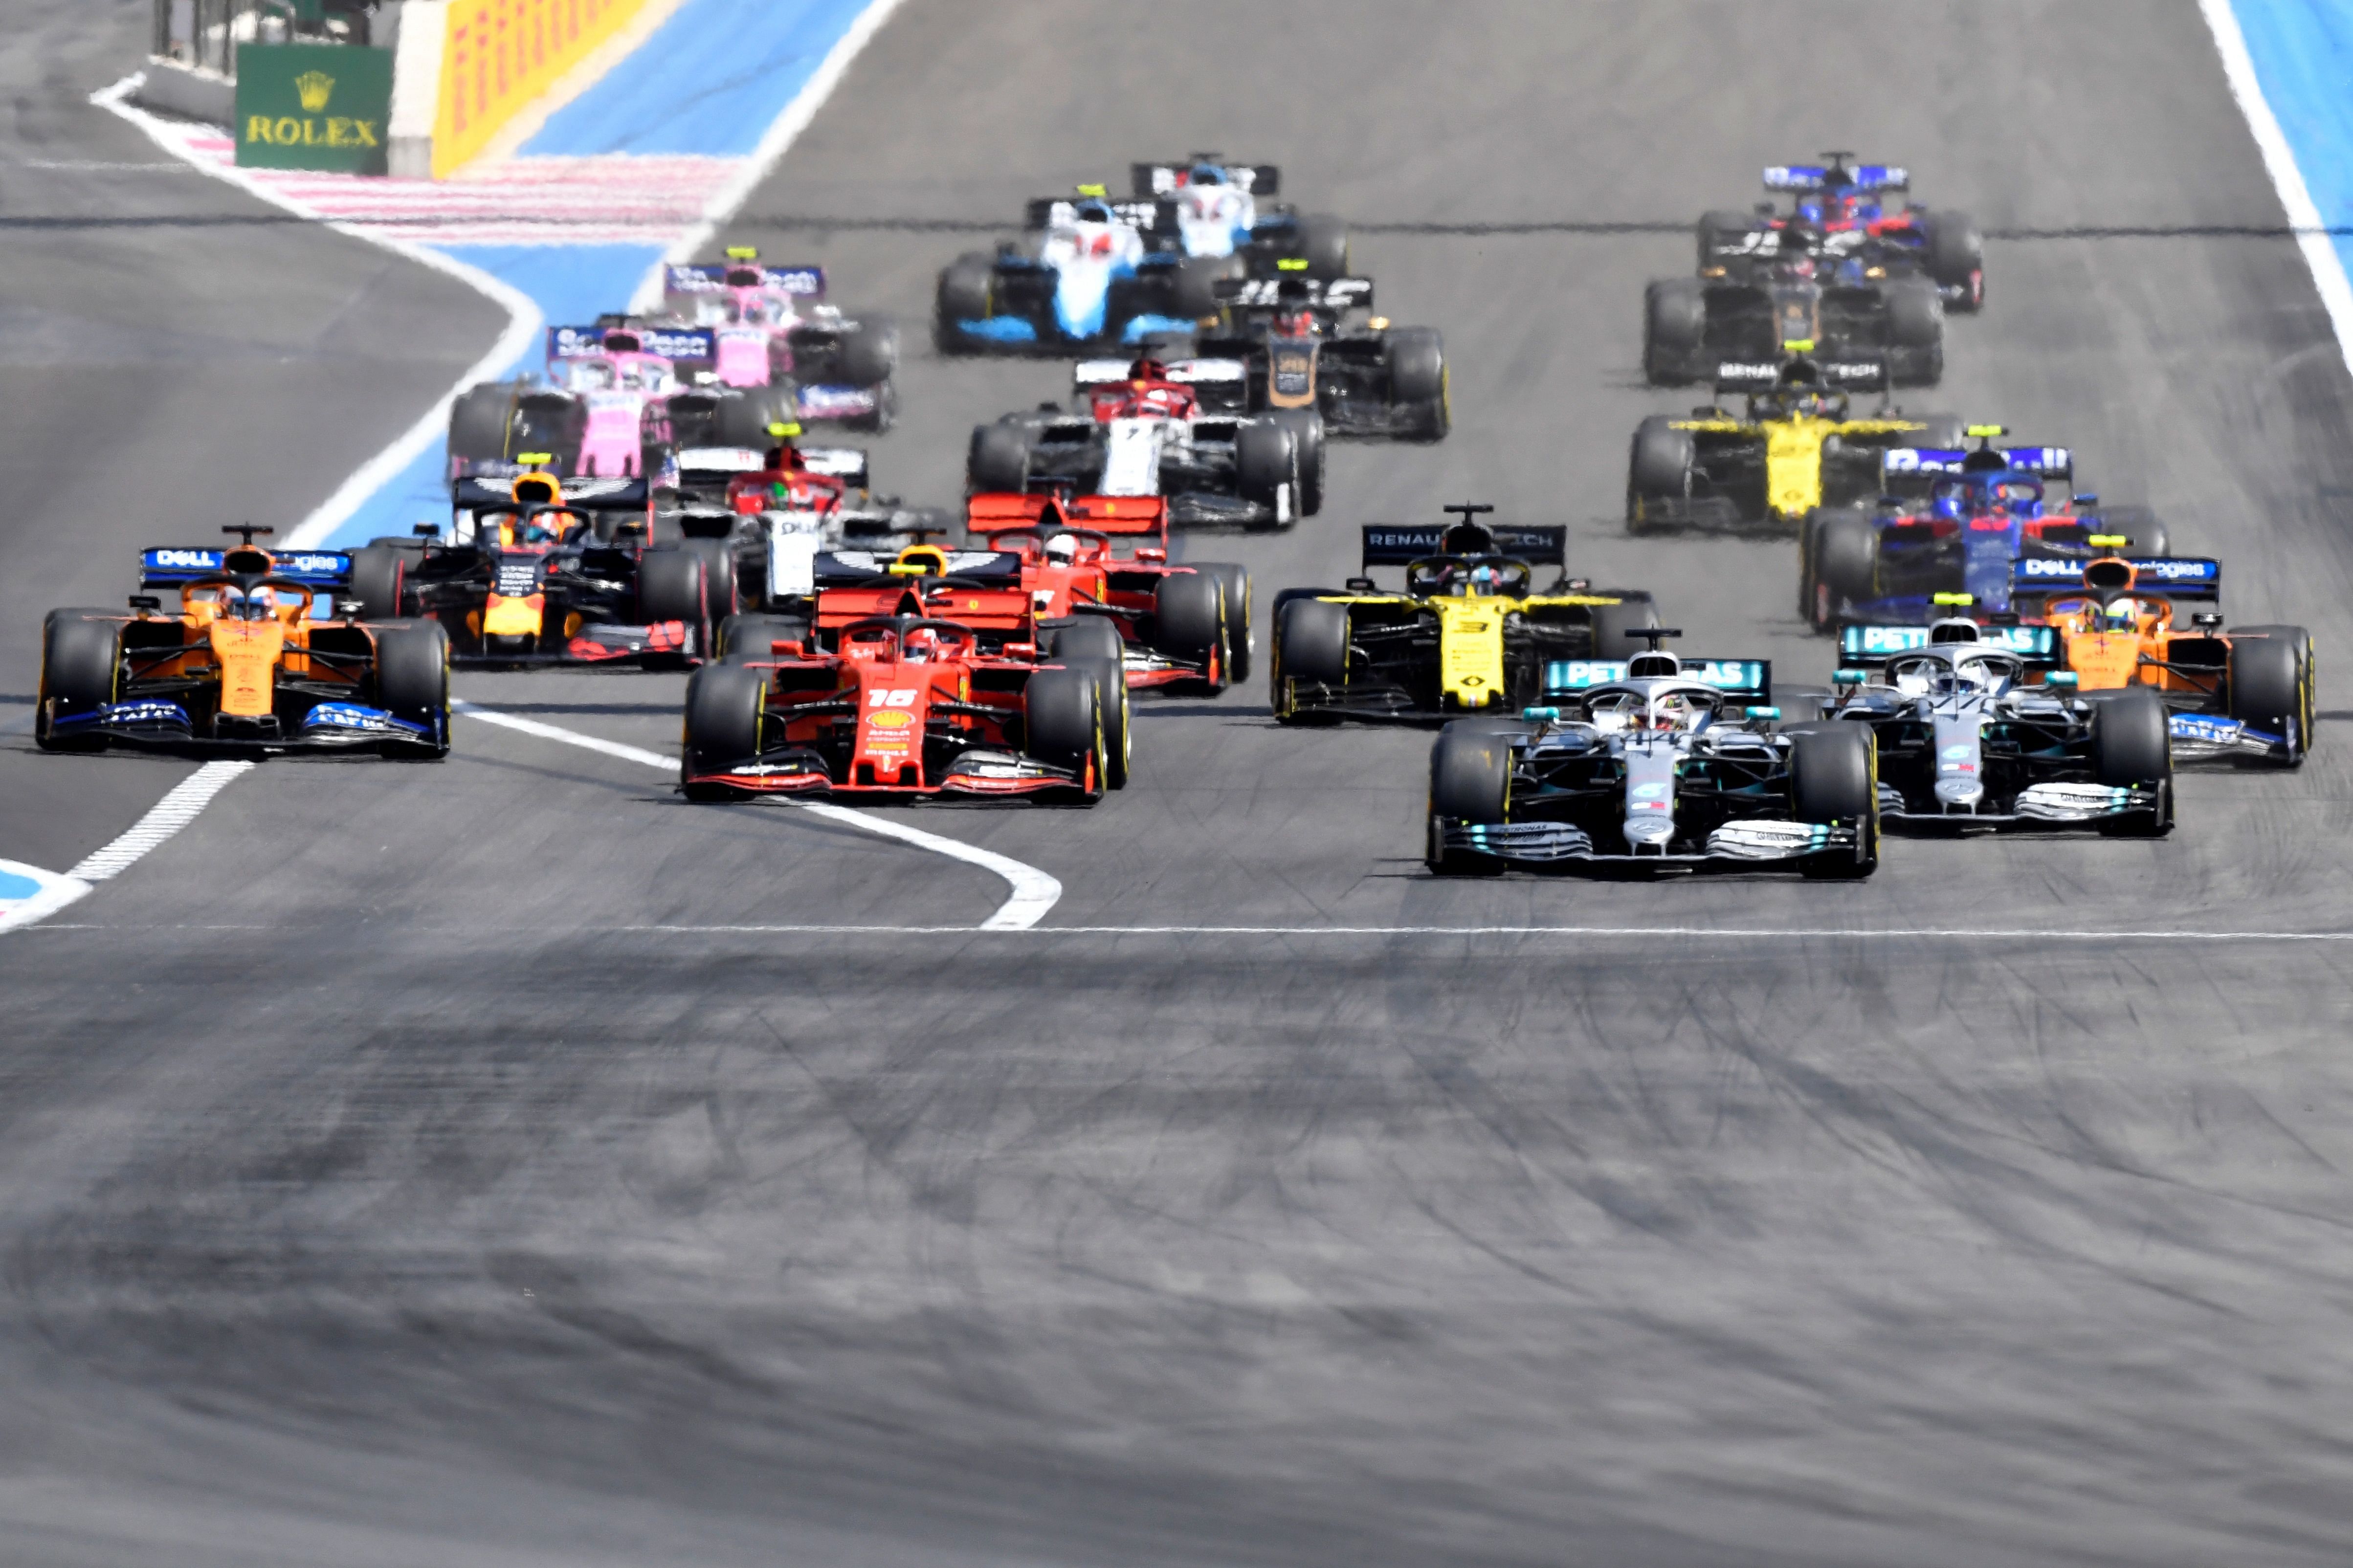 In this file photo taken on June 23, 2019 drivers take the start of the Formula One Grand Prix de France at the Circuit Paul Ricard in Le Castellet, southern France. (AFP)